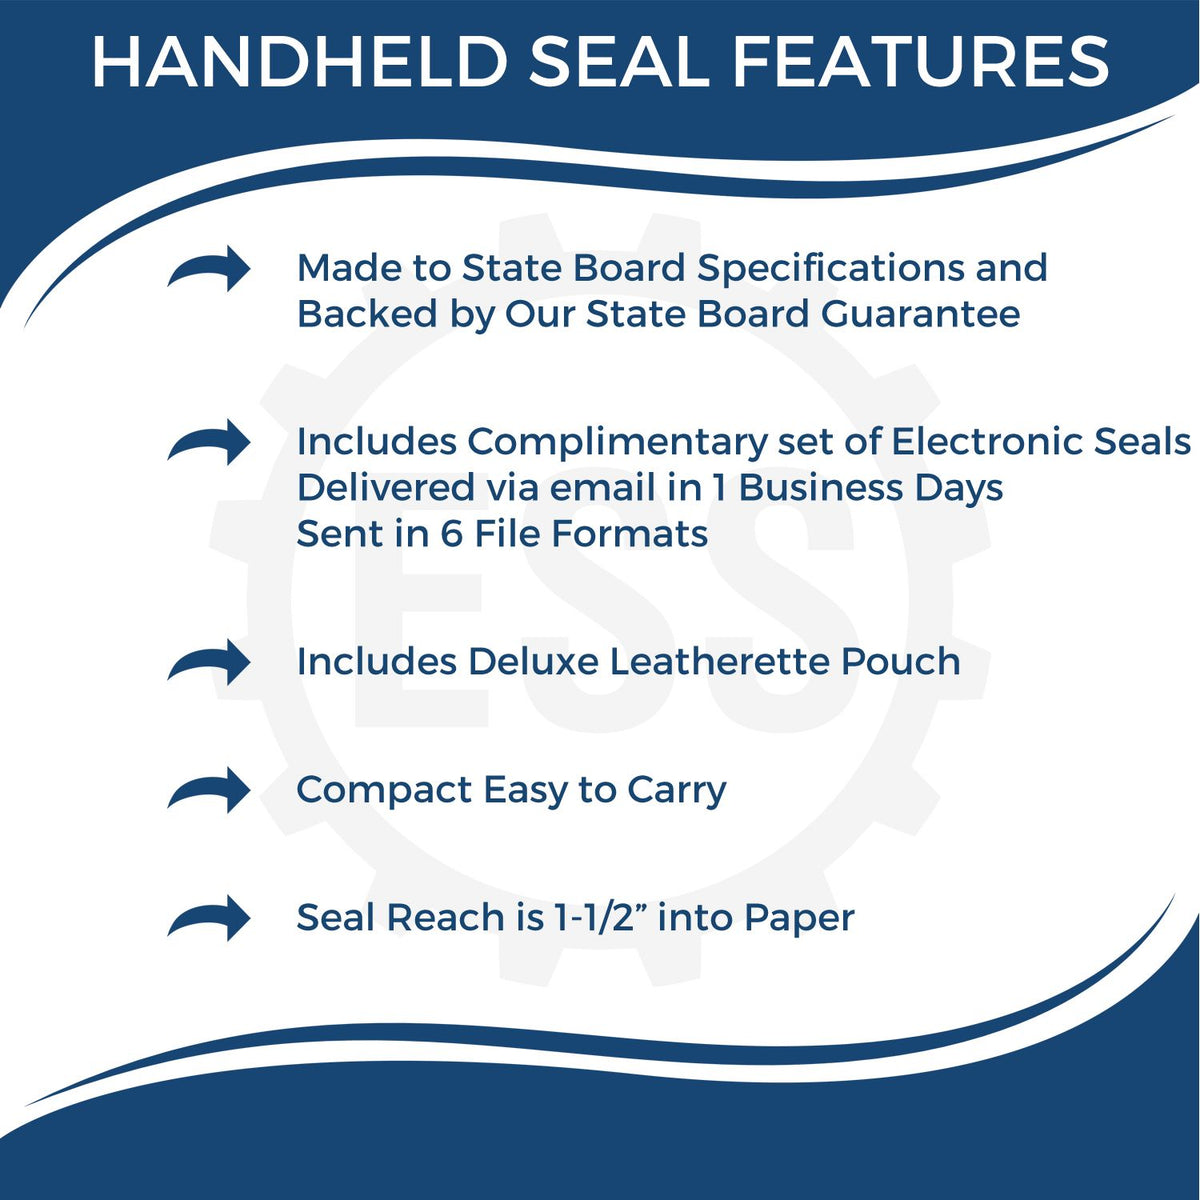 A picture of an infographic highlighting the selling points for the Handheld Maine Land Surveyor Seal